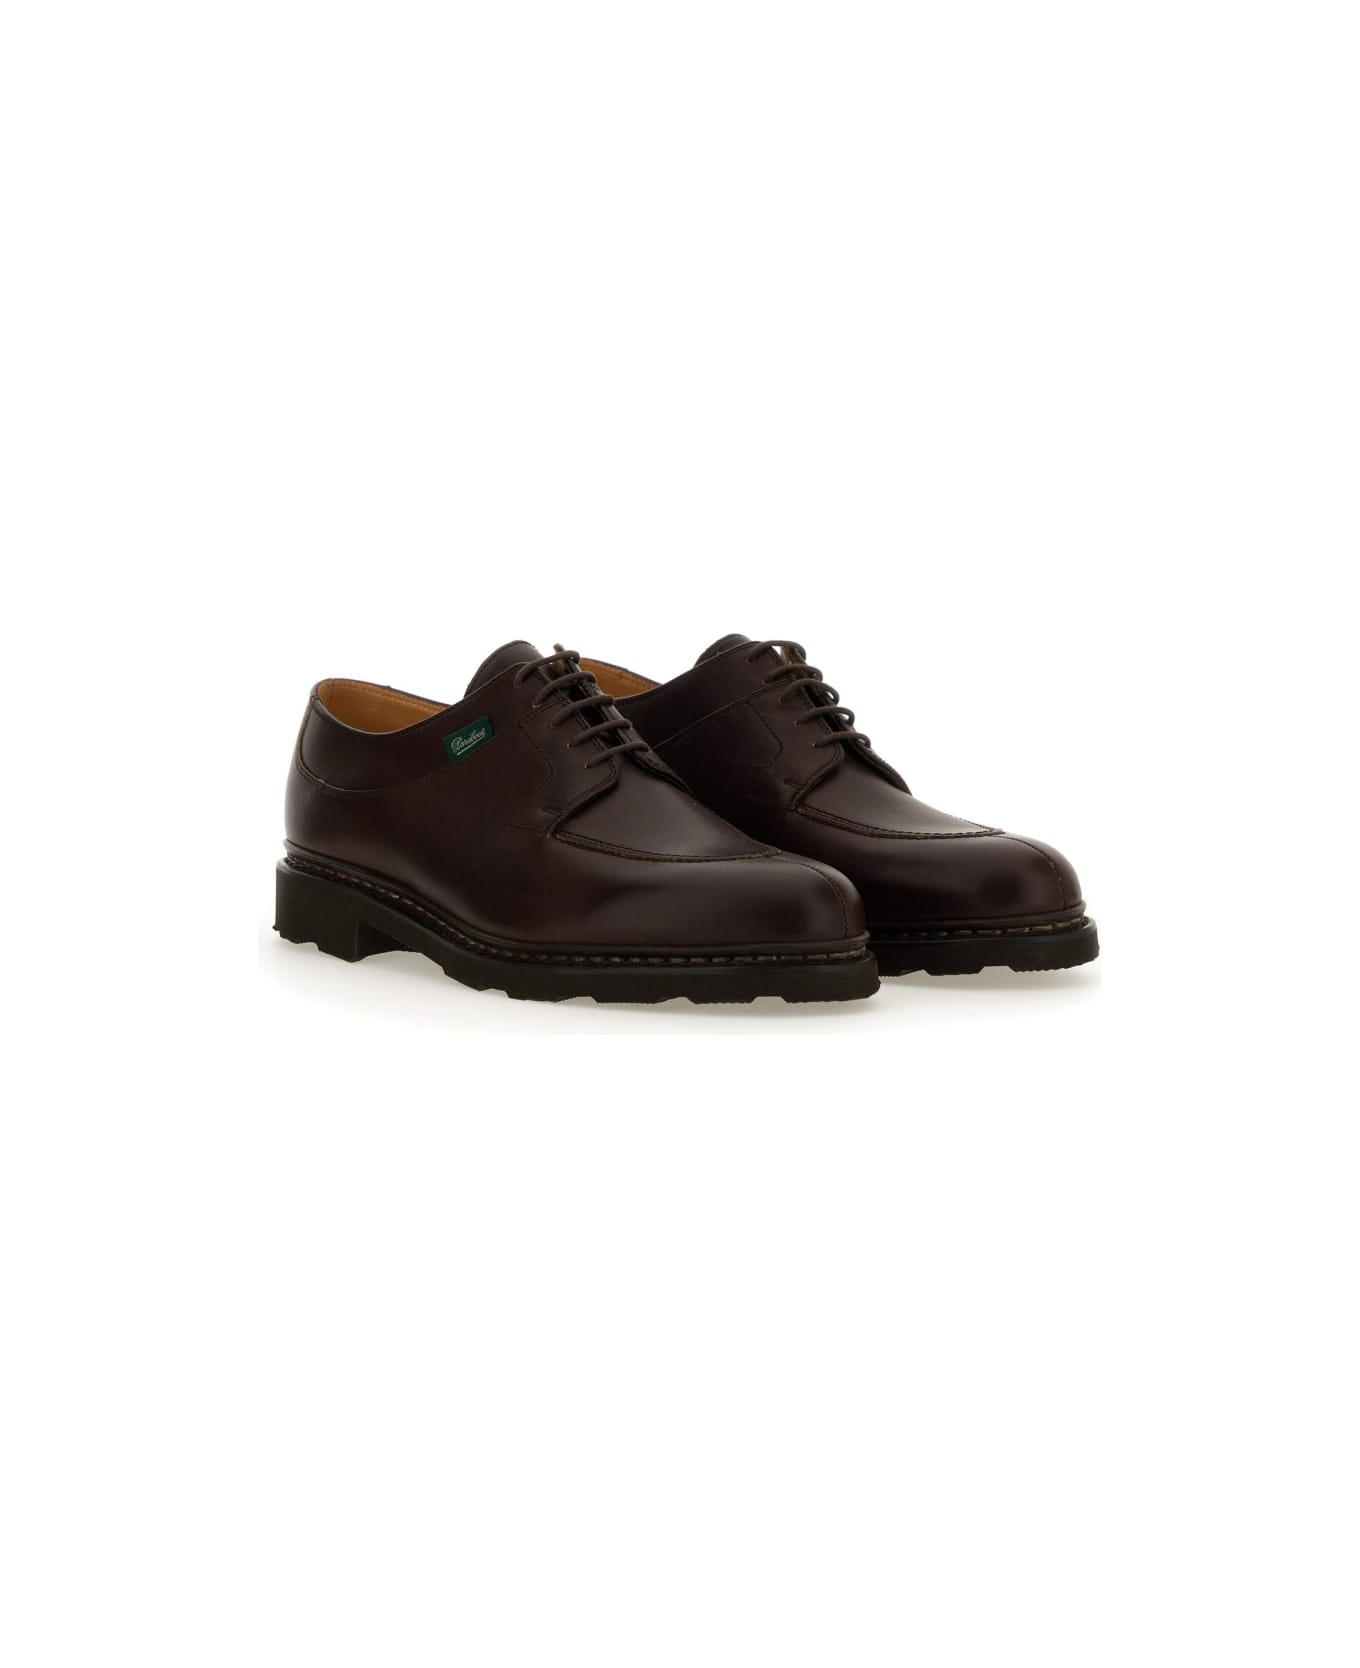 Paraboot Lace-up Avignon - BROWN